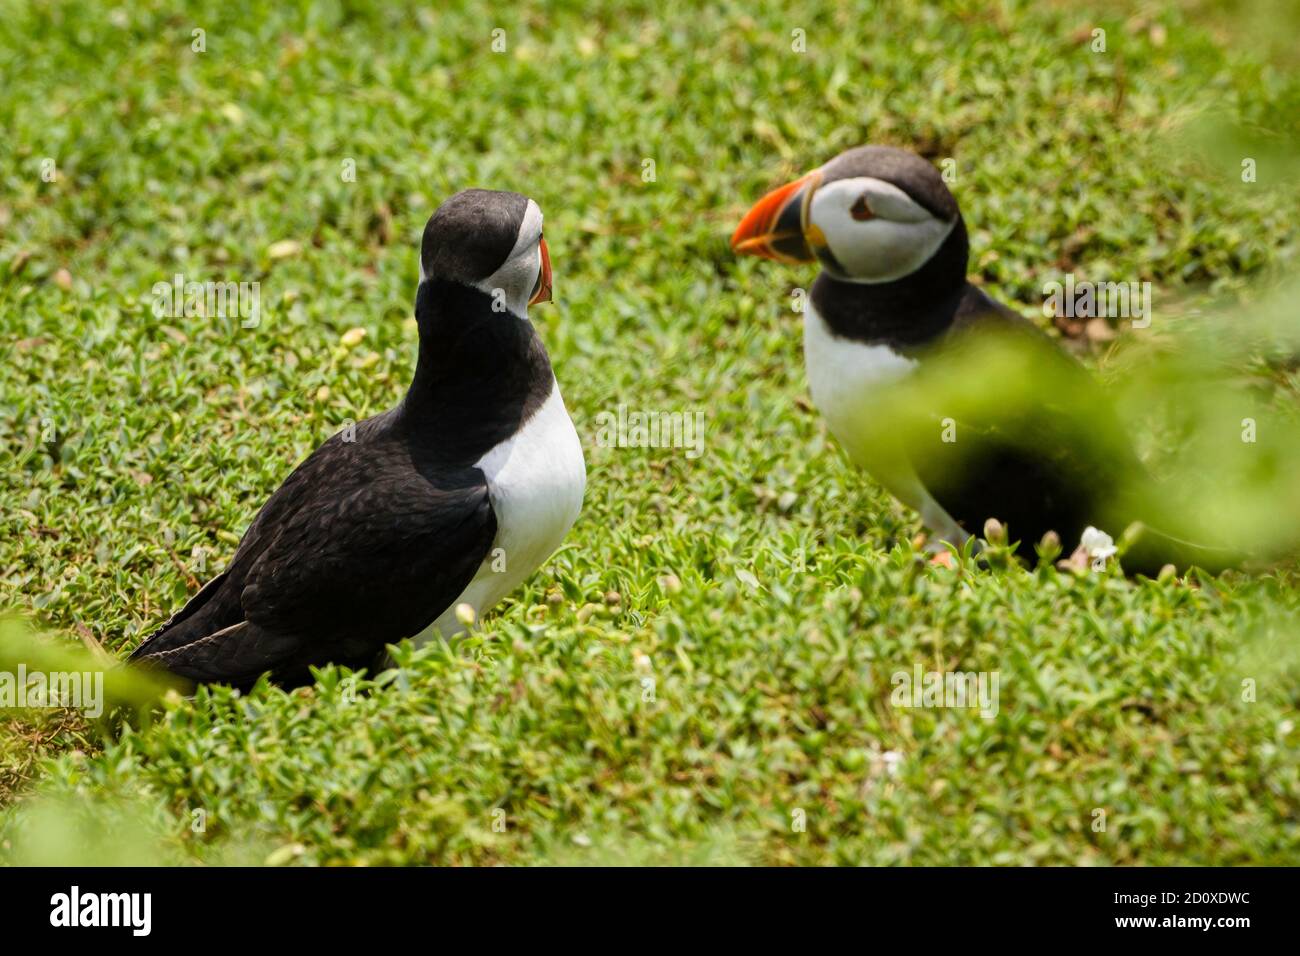 Skomer Island Puffins nesting and interacting with their mates on Skomer Island, Pembrokeshire, the largest puffin colony in the south of the UK. Stock Photo